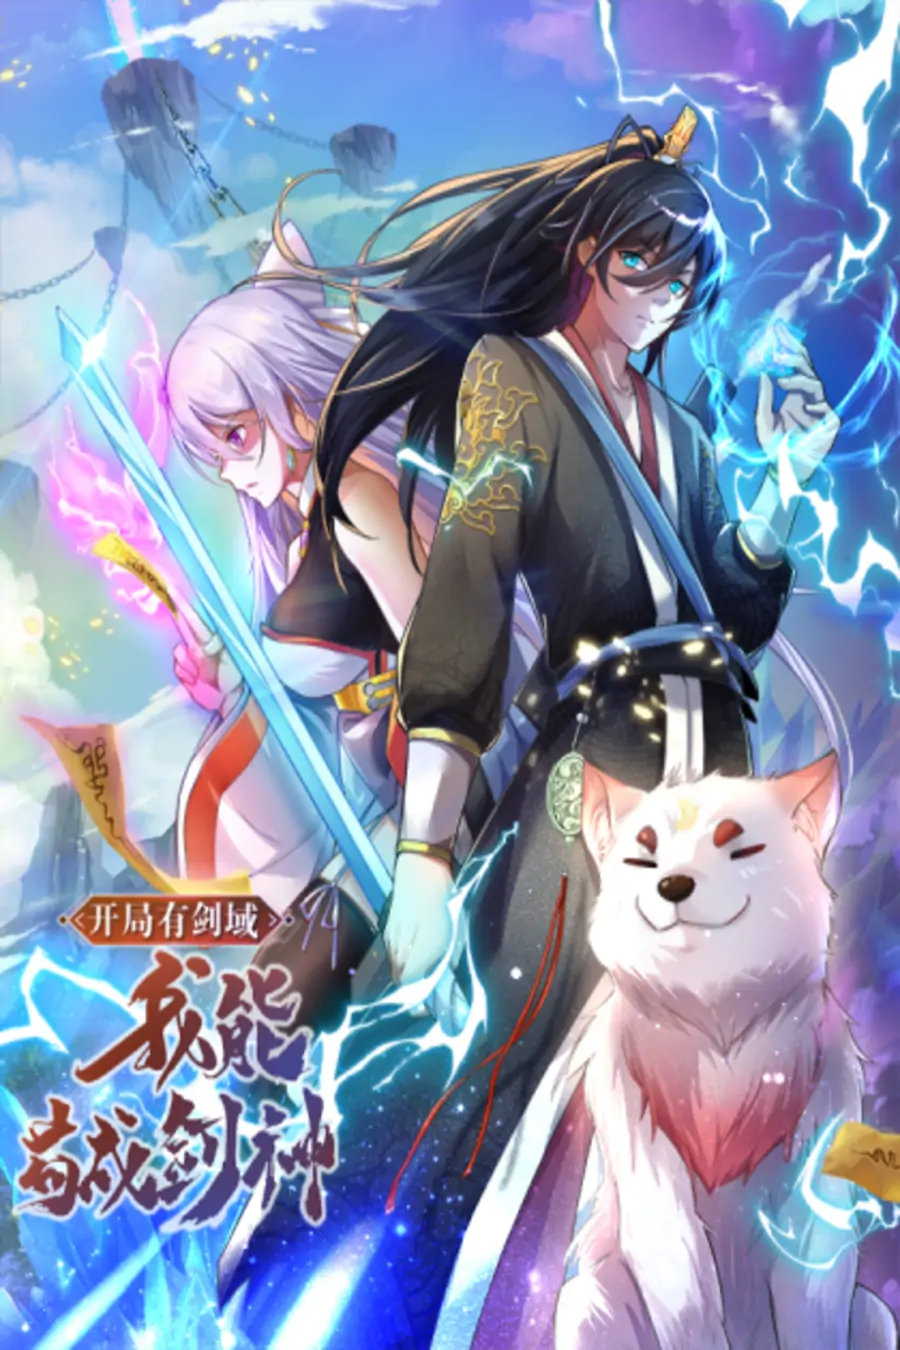 Becoming A Sword Deity By Expanding My Sword Domain - chapter 95 - #1